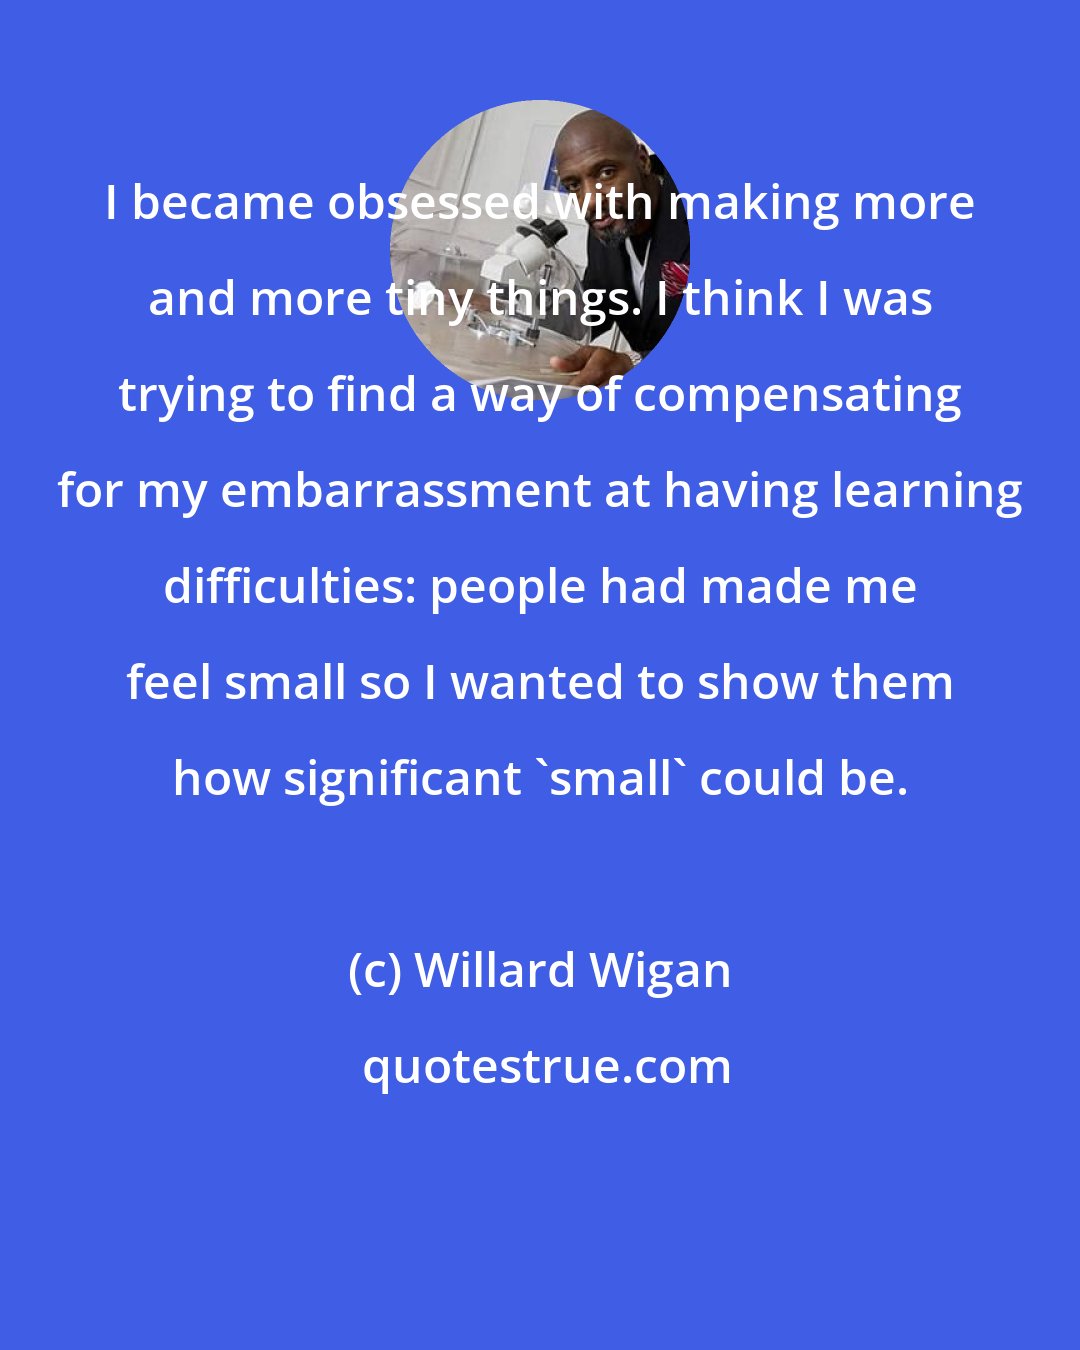 Willard Wigan: I became obsessed with making more and more tiny things. I think I was trying to find a way of compensating for my embarrassment at having learning difficulties: people had made me feel small so I wanted to show them how significant 'small' could be.